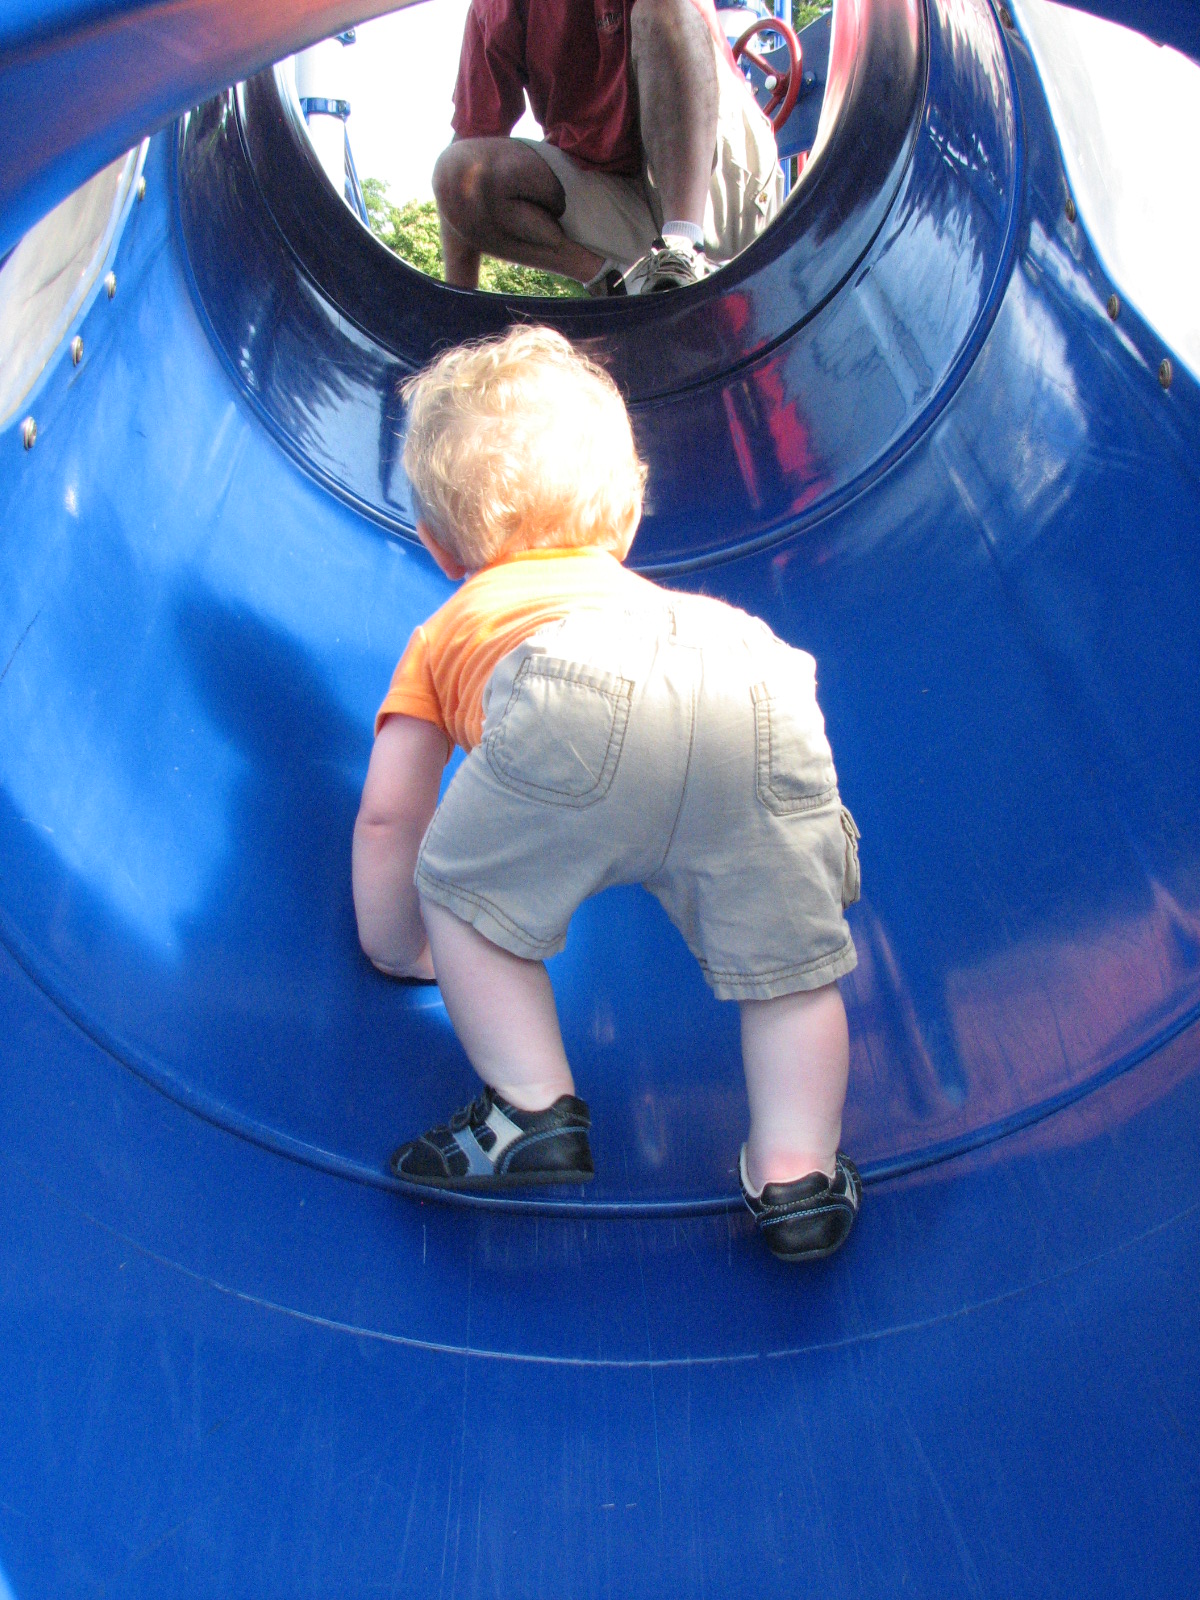 Going back for more (he really did climb the whole slide by himself!)